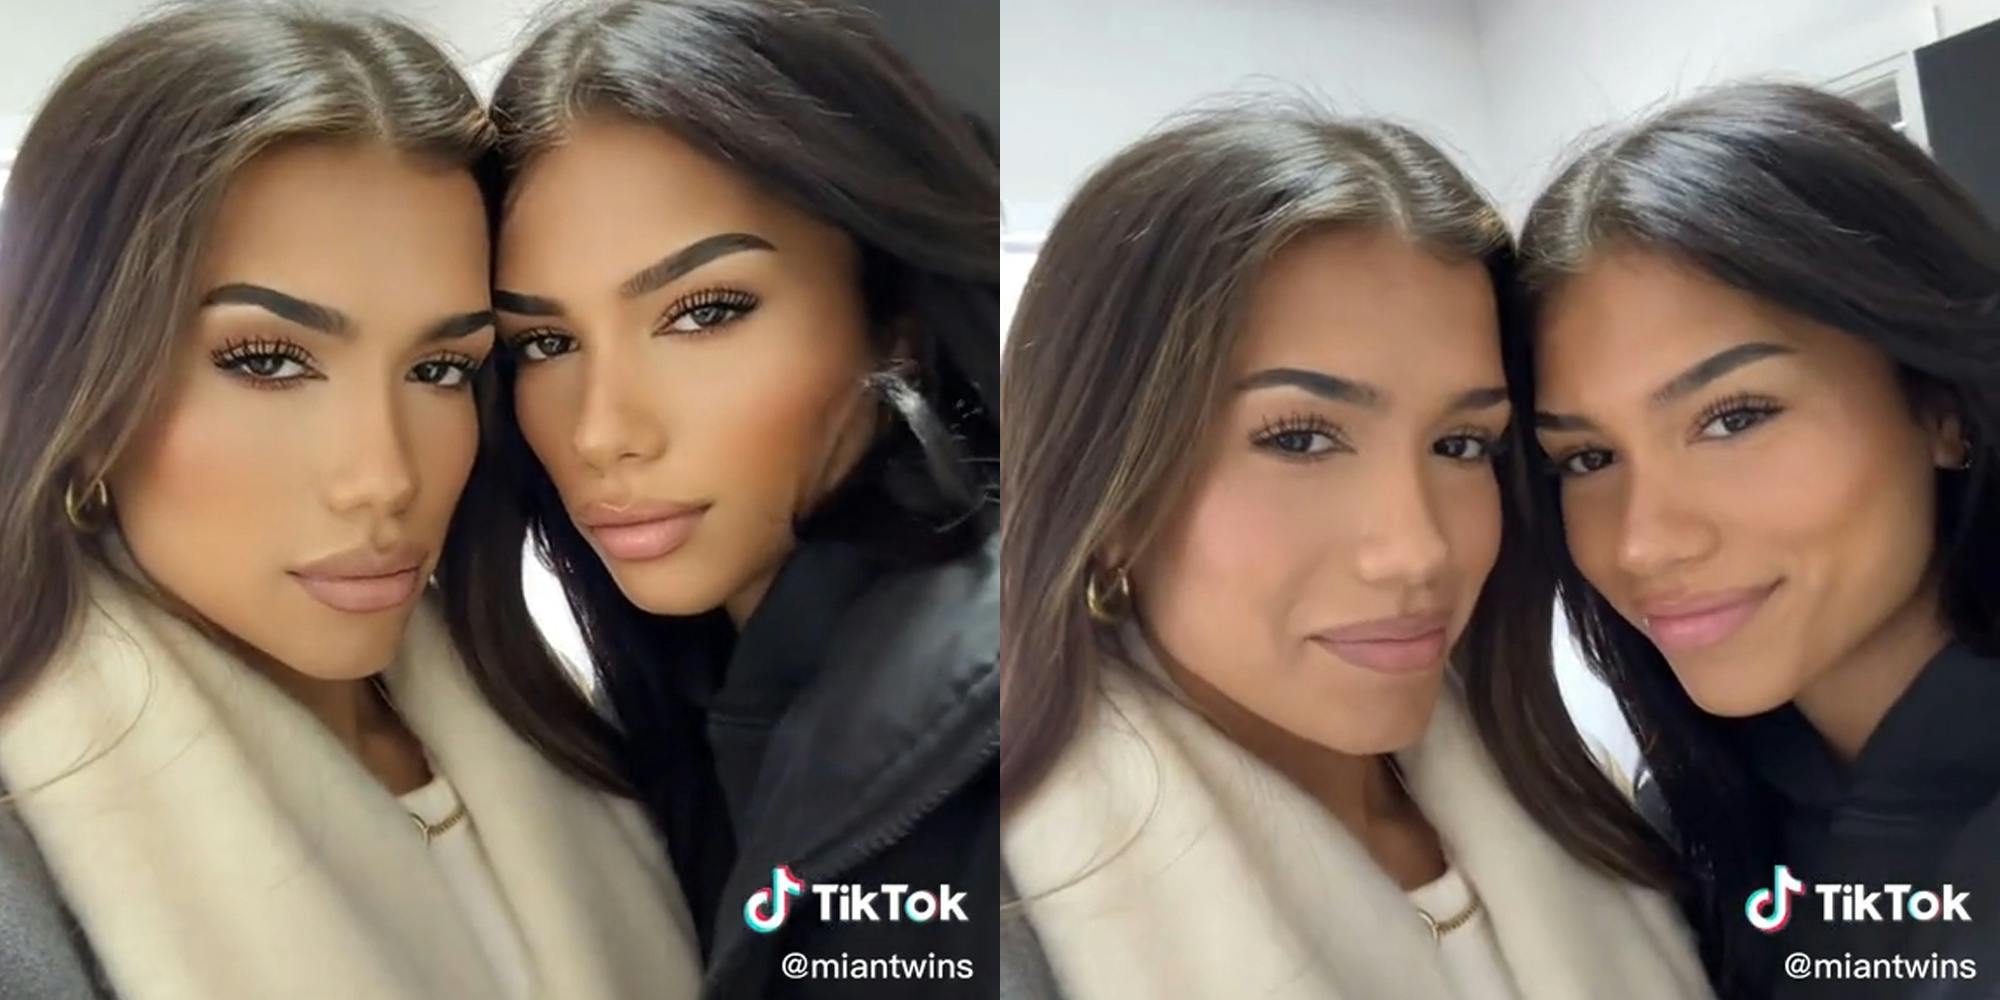 Everyone’s talking about TikTok’s ‘bold glamour’ filter